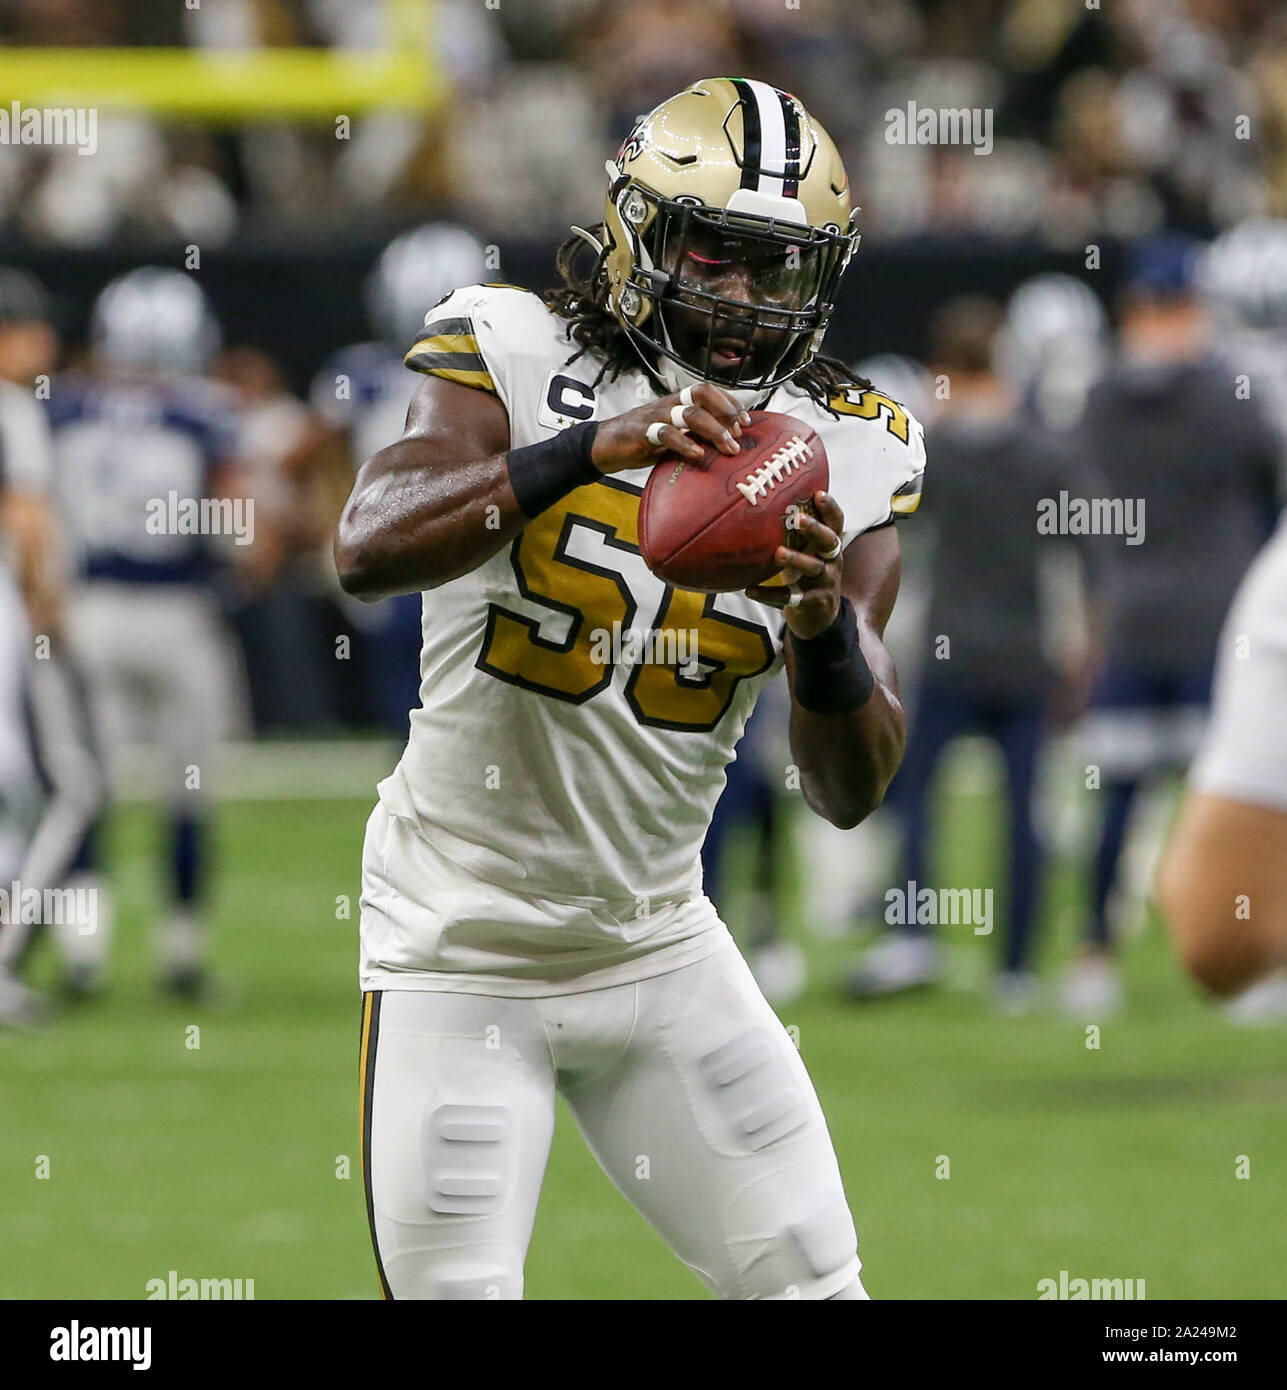 New Orleans, LA, USA. 29th Sep, 2019. New Orleans Saints linebacker Demario Davis (56) catches a pass in pre game warm ups before their game against the Dallas Cowboys at the Mercedes Benz Superdome in New Orleans, LA. Jonathan Mailhes/CSM/Alamy Live News Stock Photo